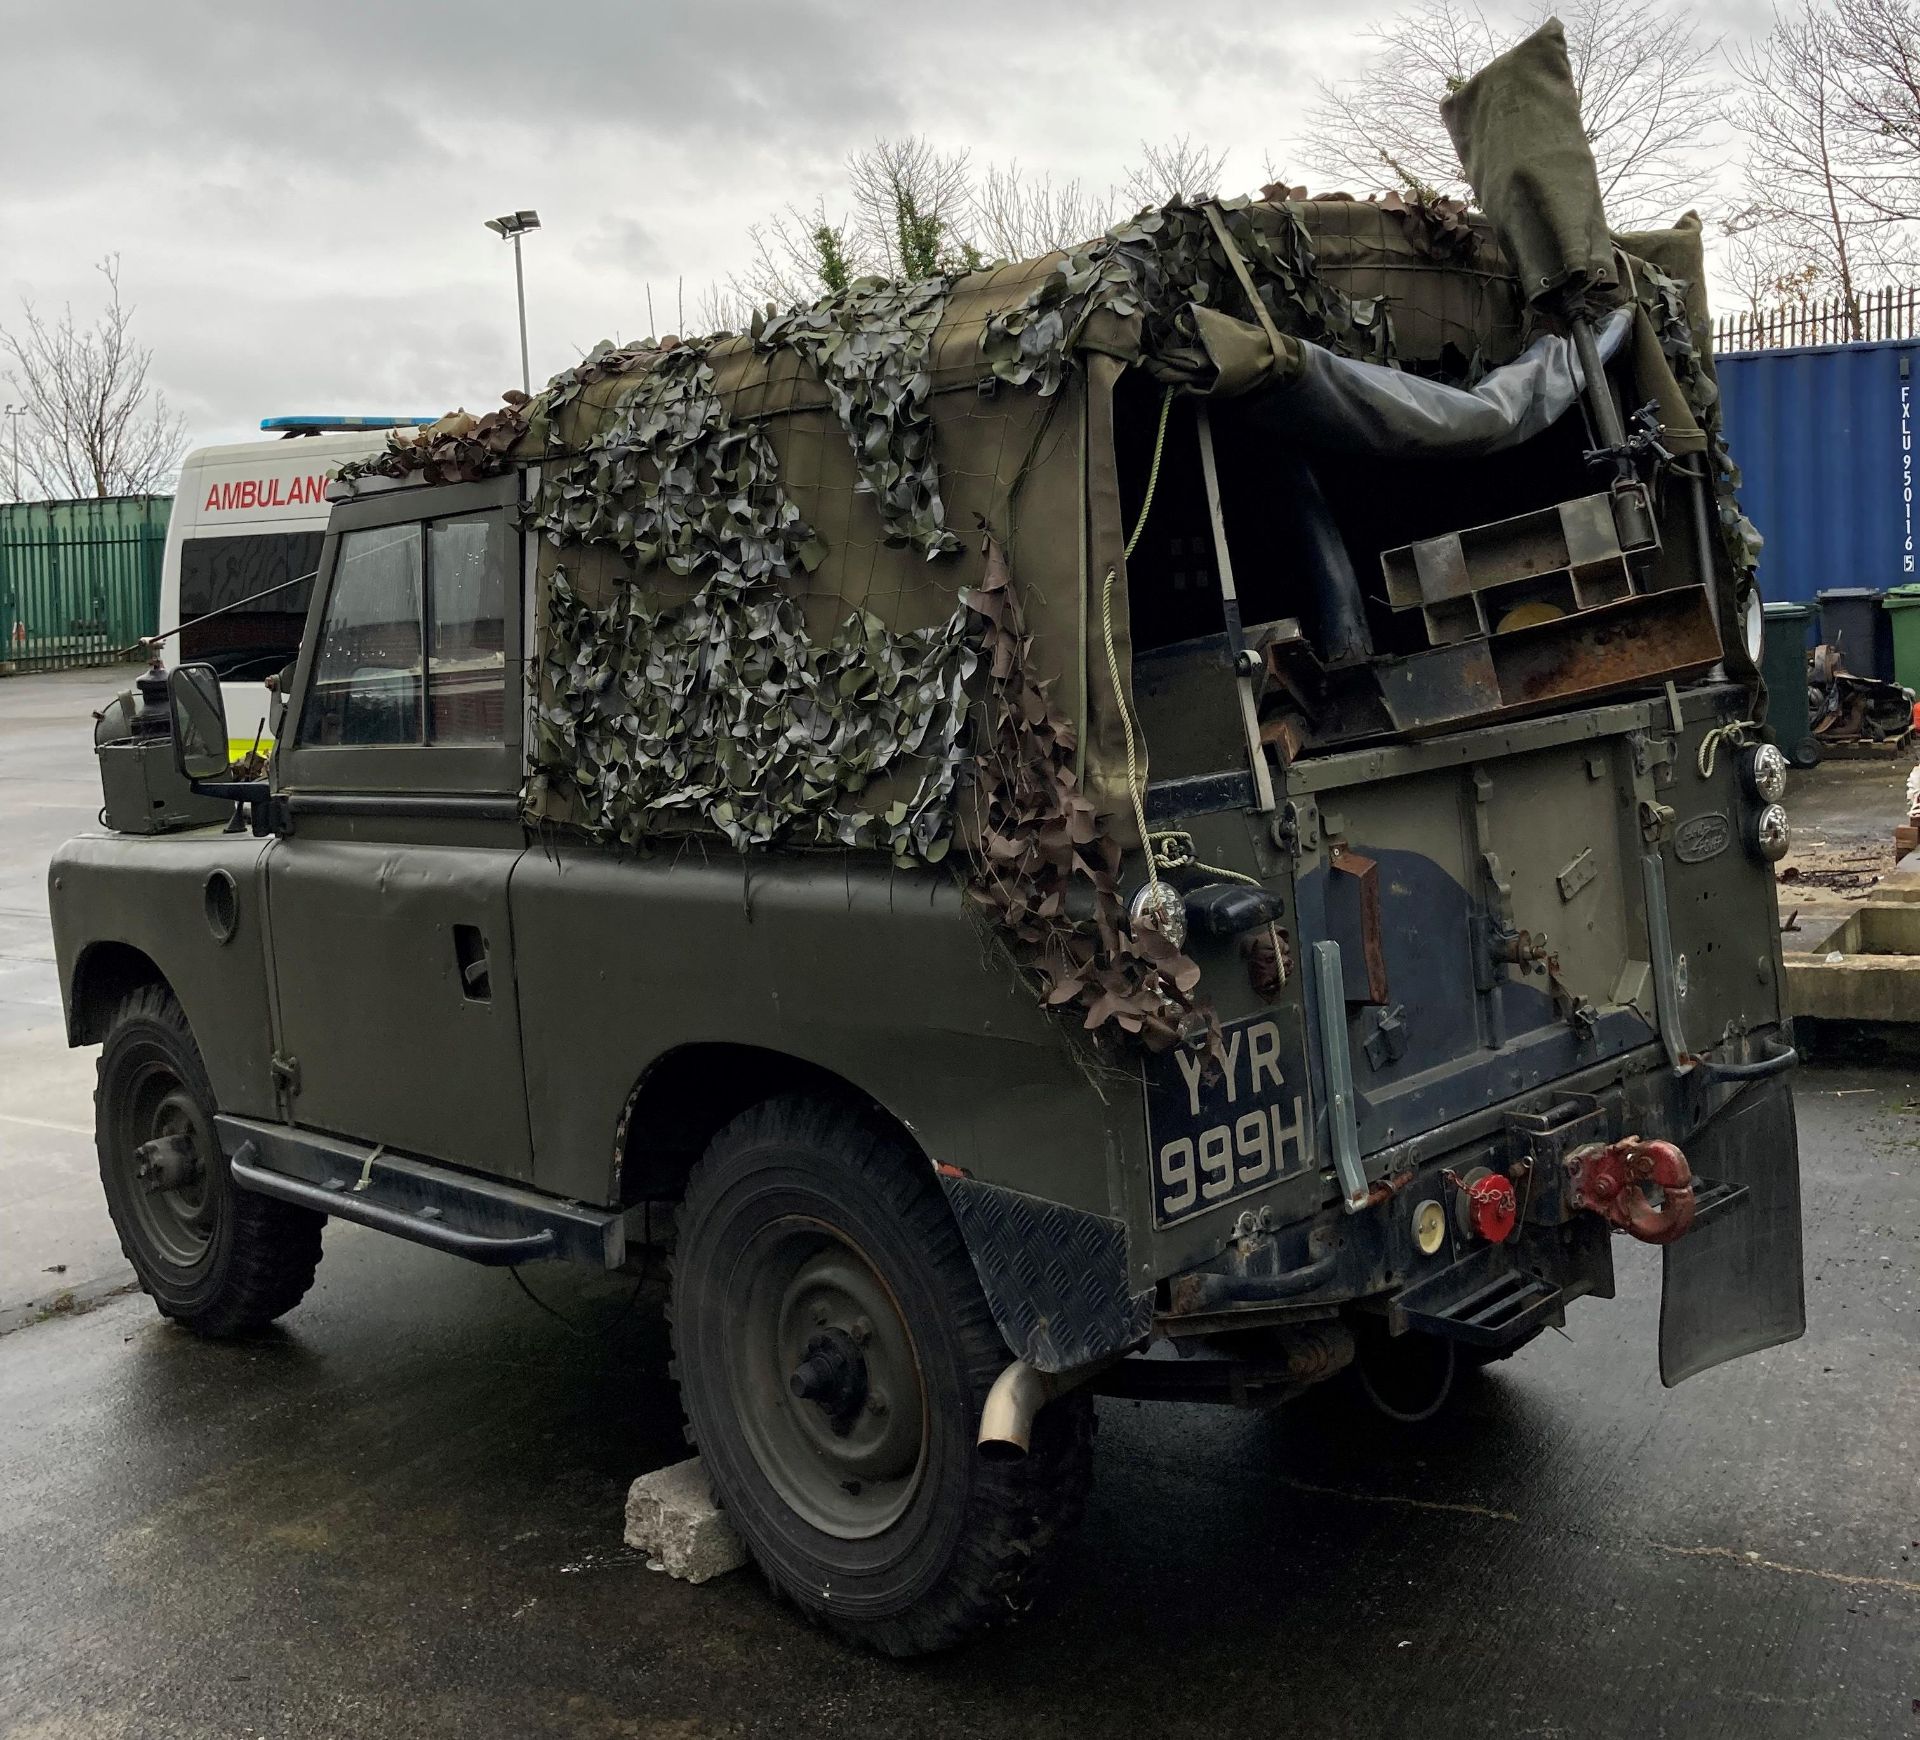 LAND ROVER LIGHT 4X4 UTILITY 2500cc - Diesel - Camouflage. - Image 4 of 9